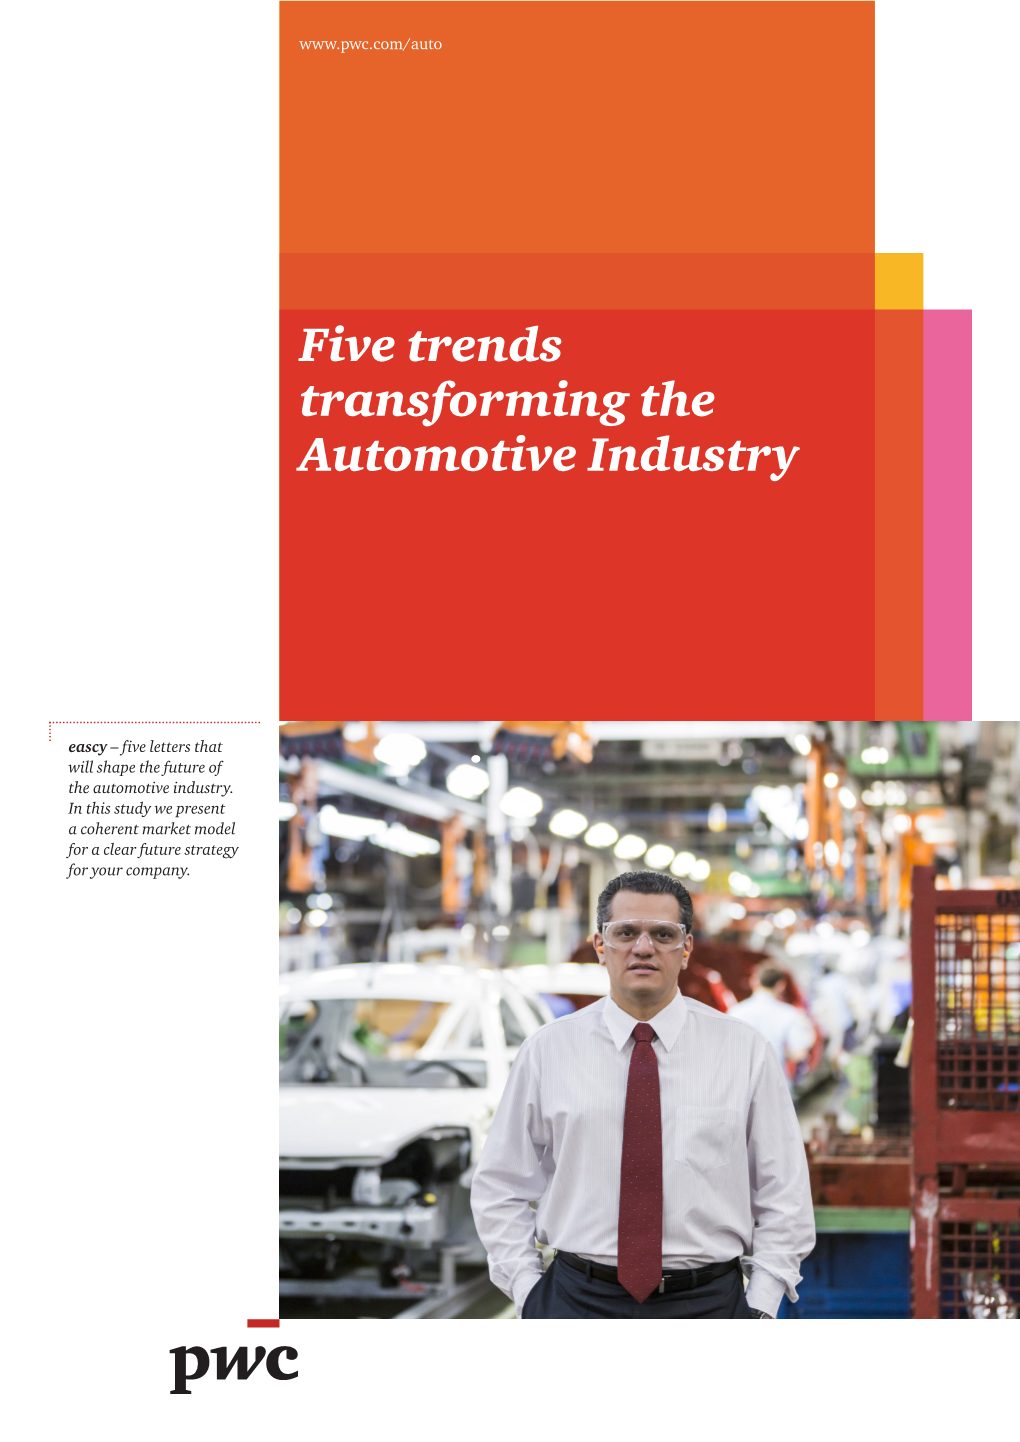 Five Trends Transforming the Automotive Industry